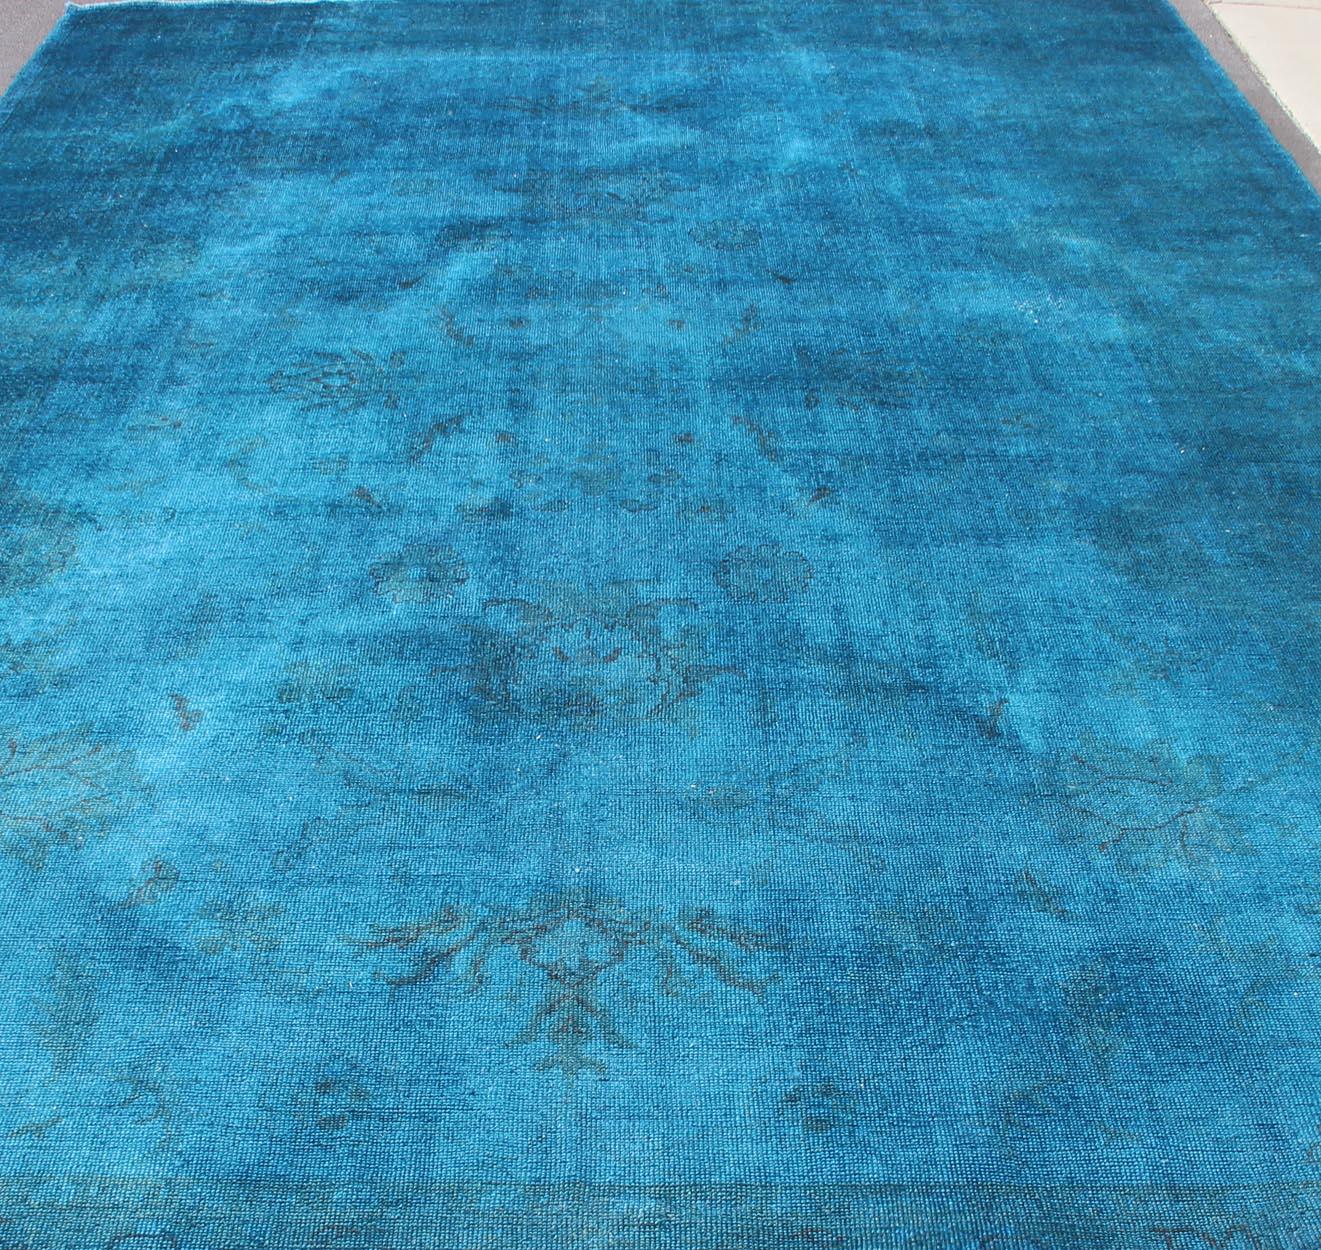 Large Modern Oushak Turkish Rug Over-Dyed in Blue Shades For Sale 5